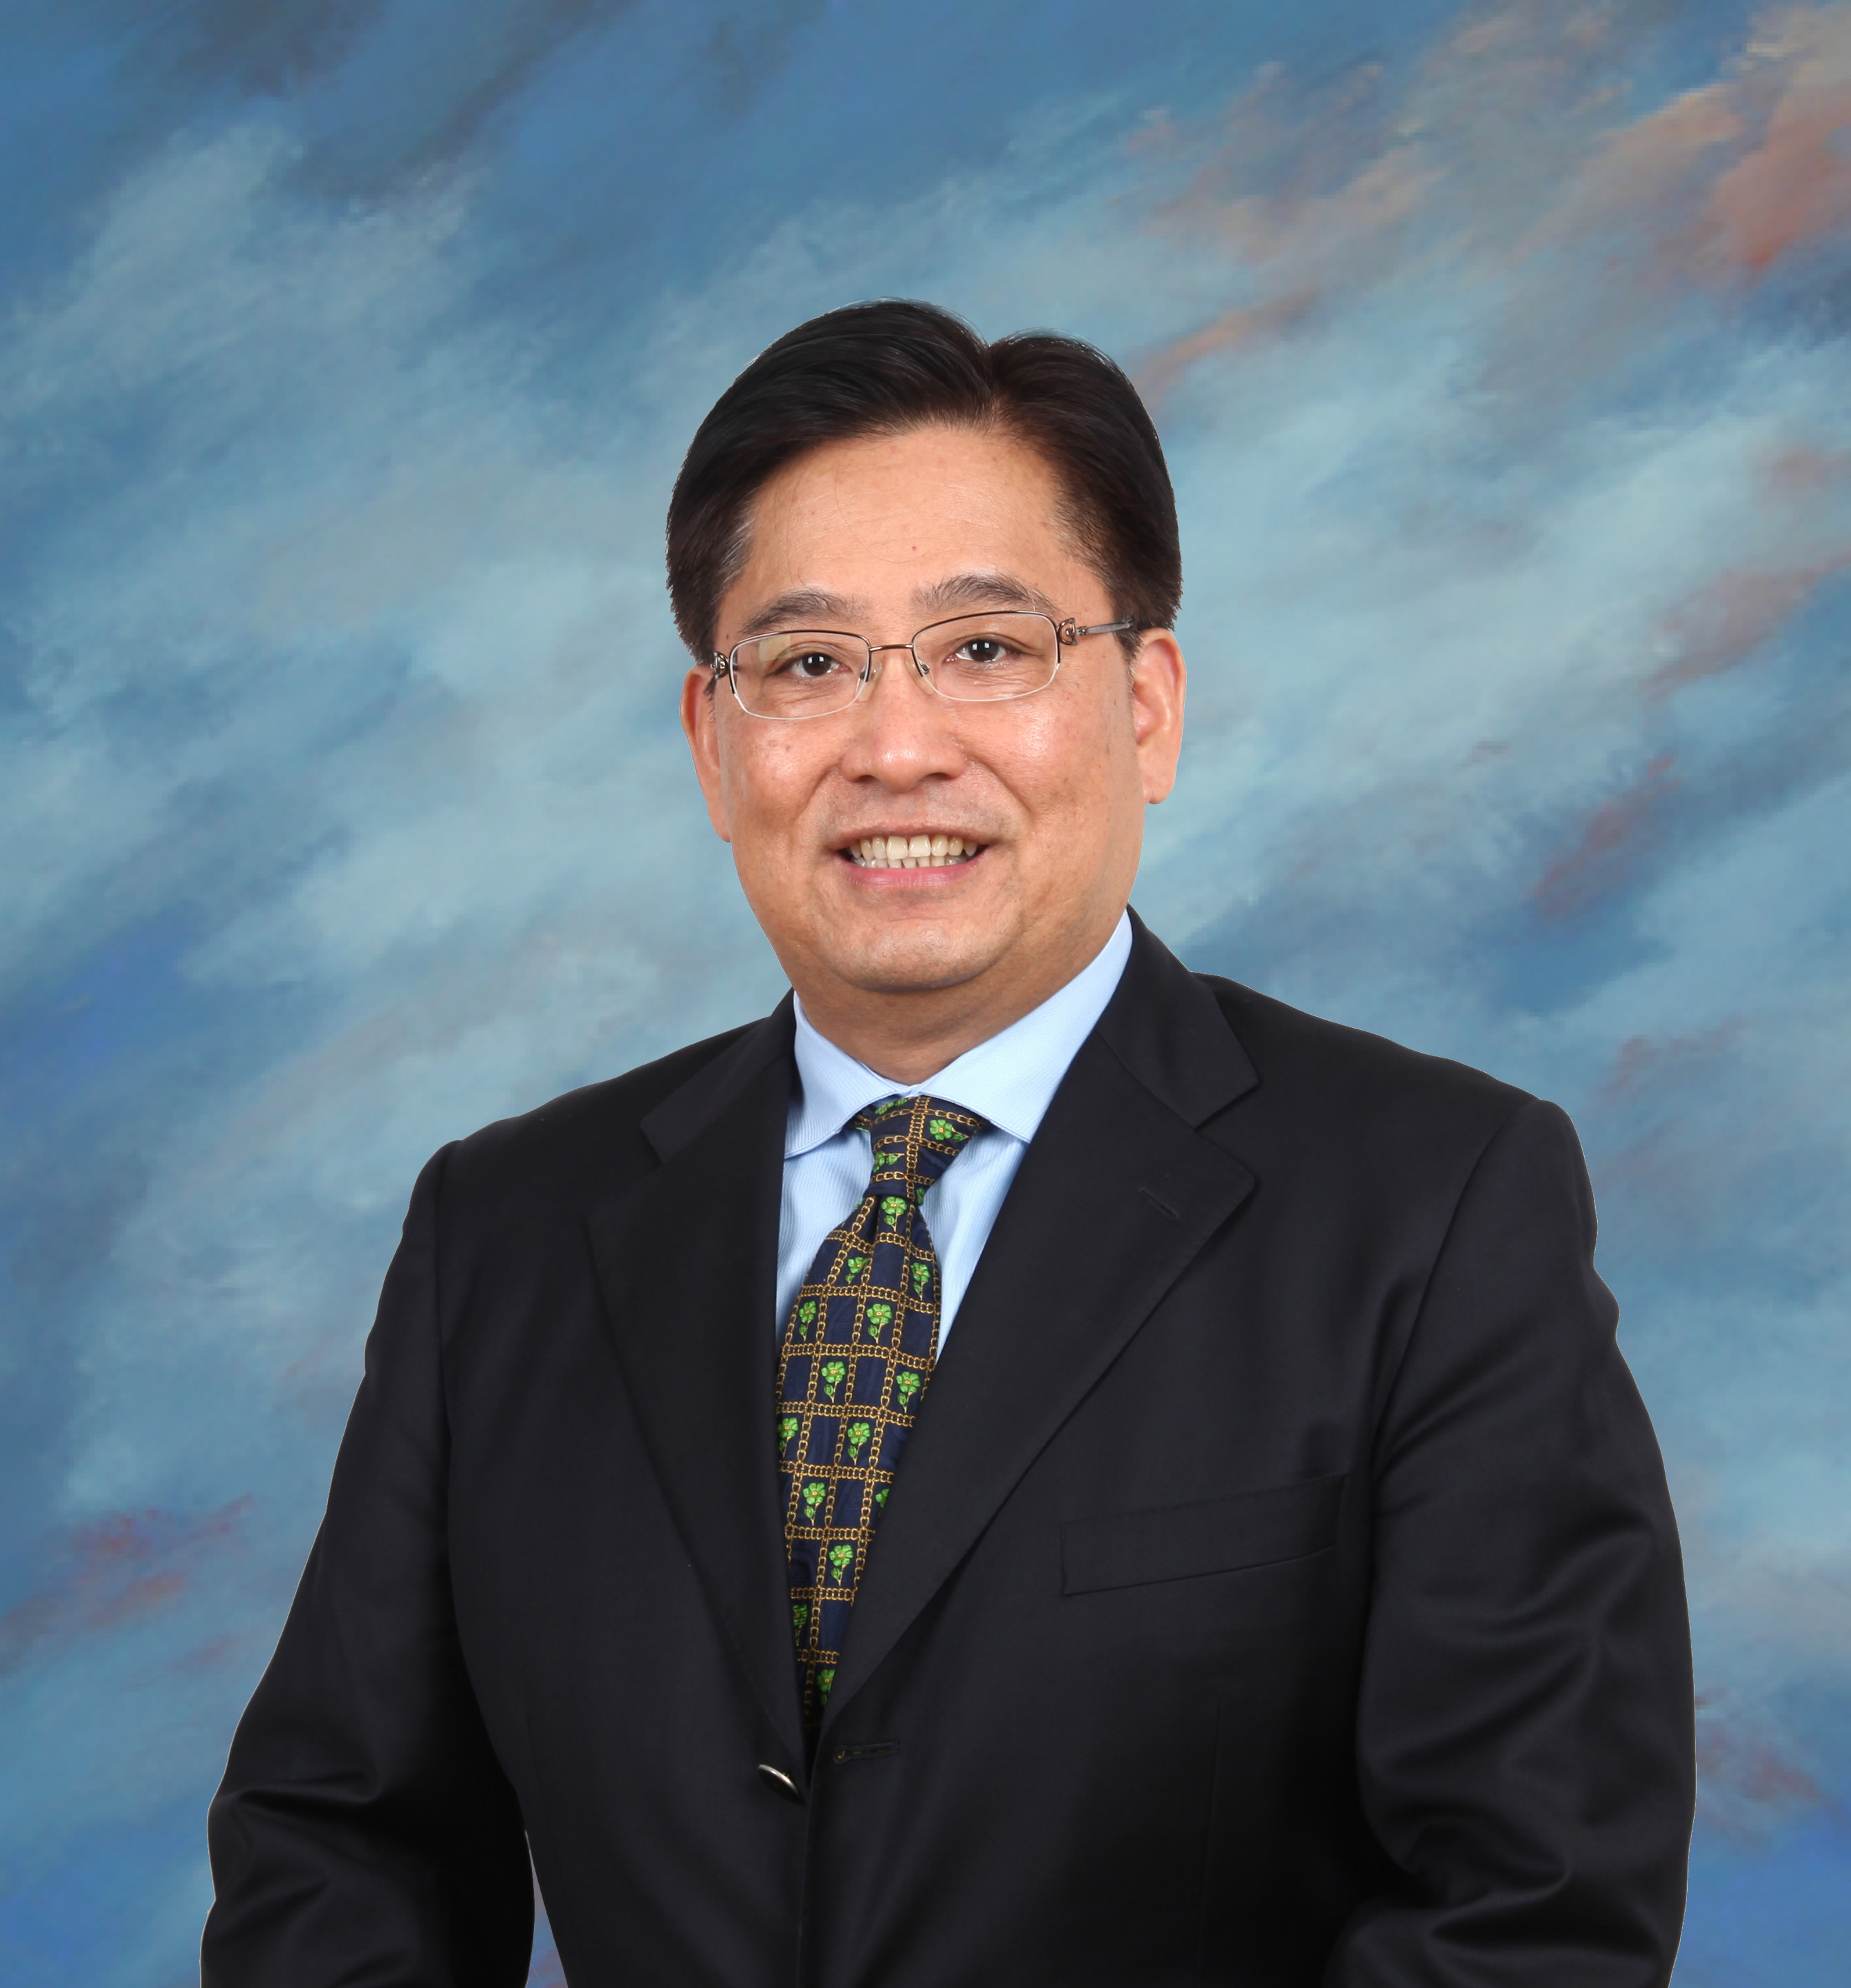 Chen Jialiang, Senior Vice President of Federal Express and President of China